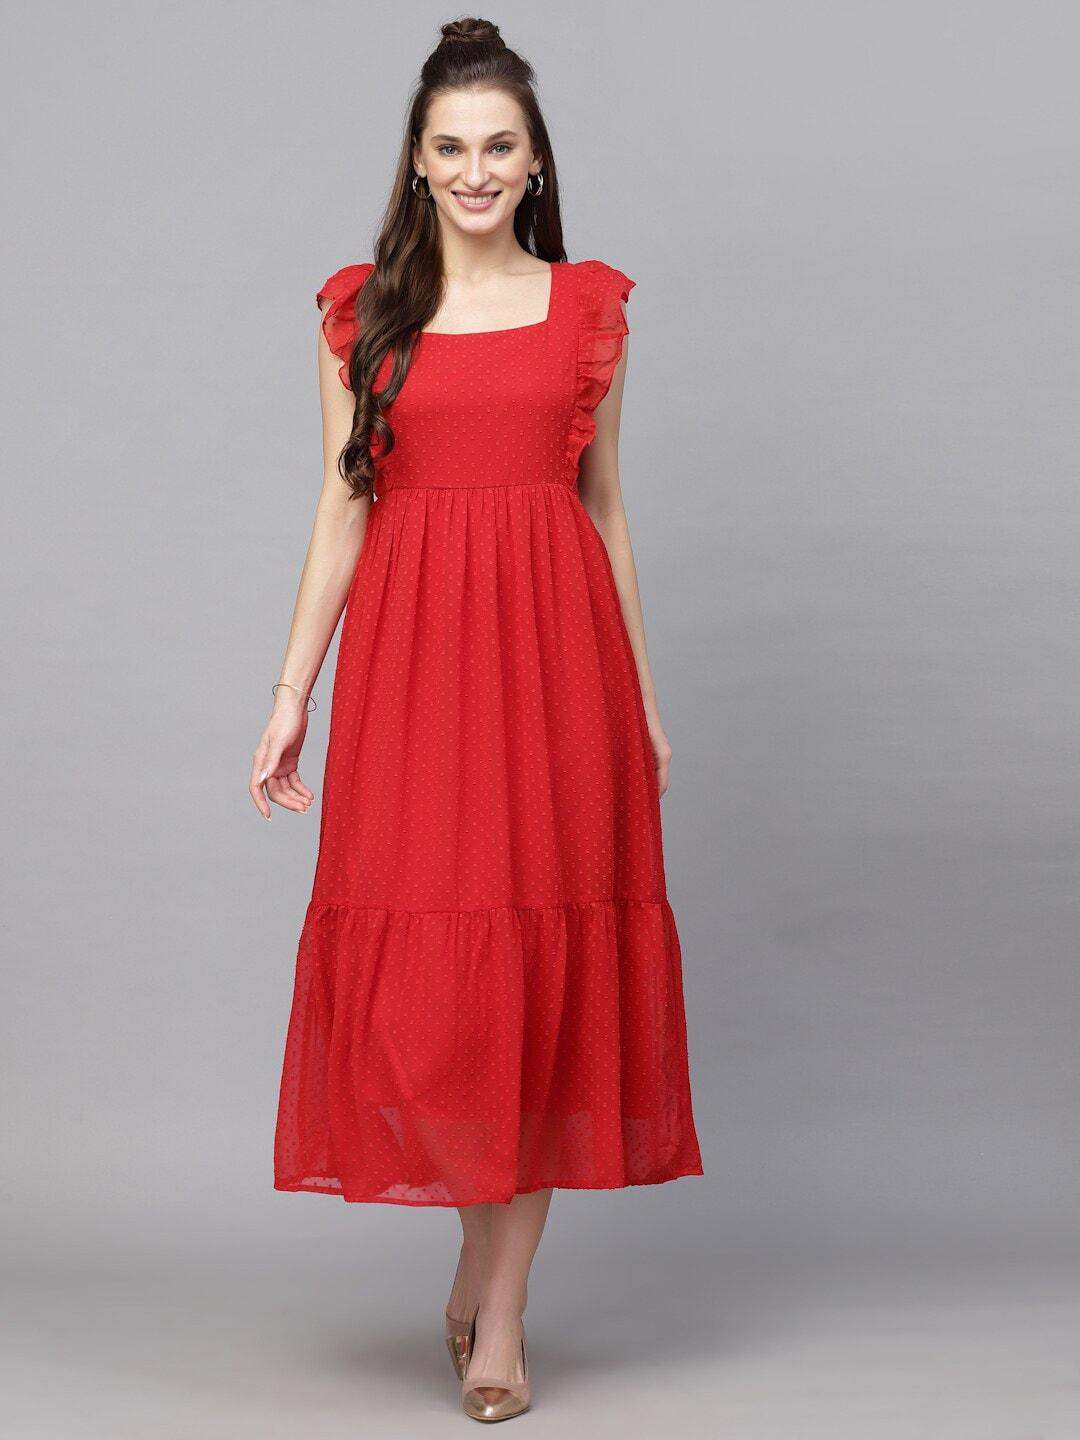 aayu-square-neck-georgette-fit-and-flare-midi-dress